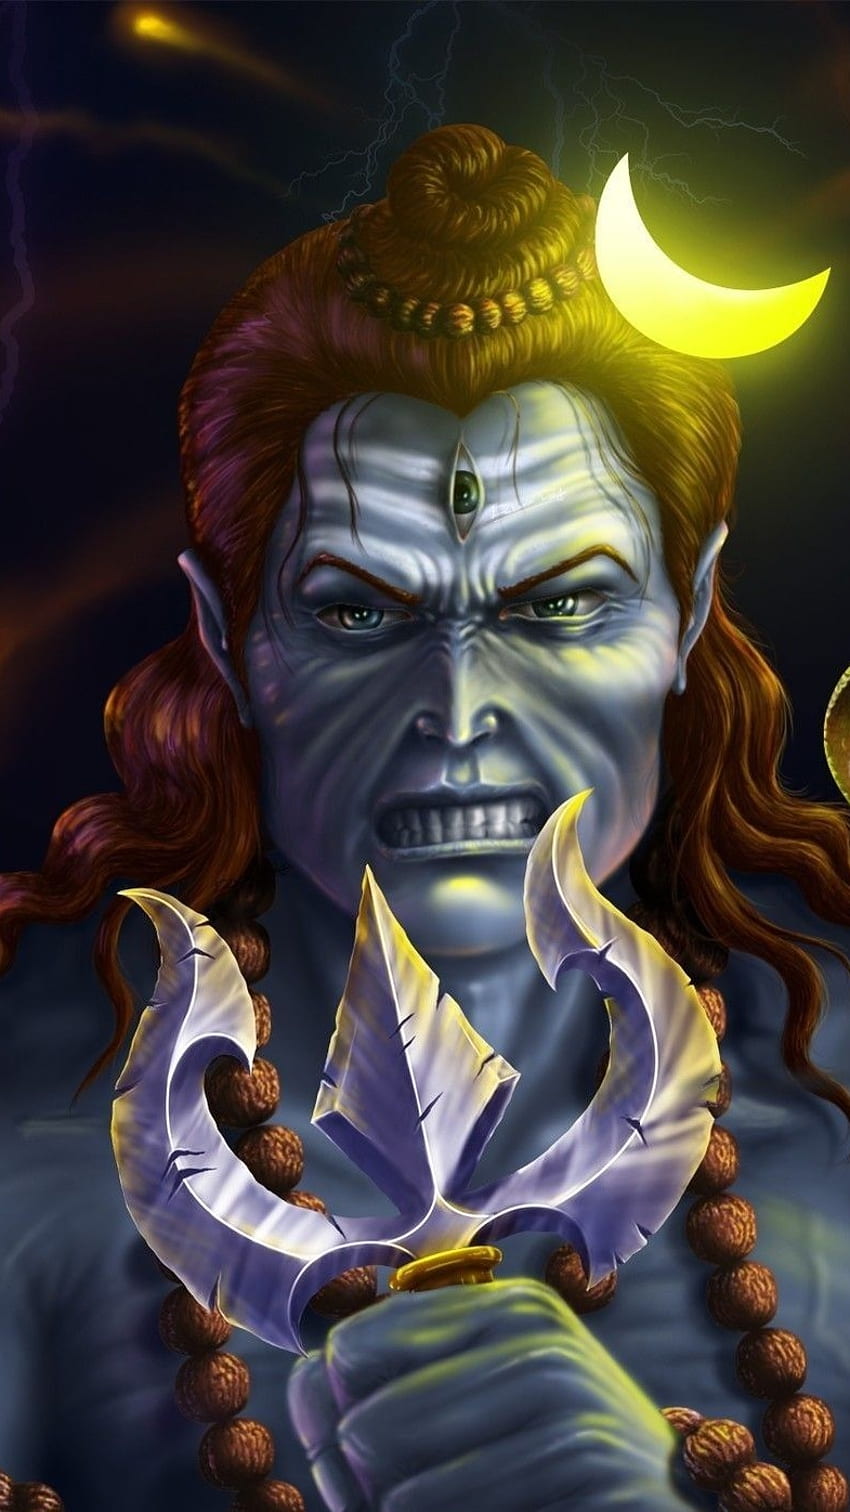 The Ultimate Collection of 999+ Captivating Angry Shiva Images in Full 4K Resolution